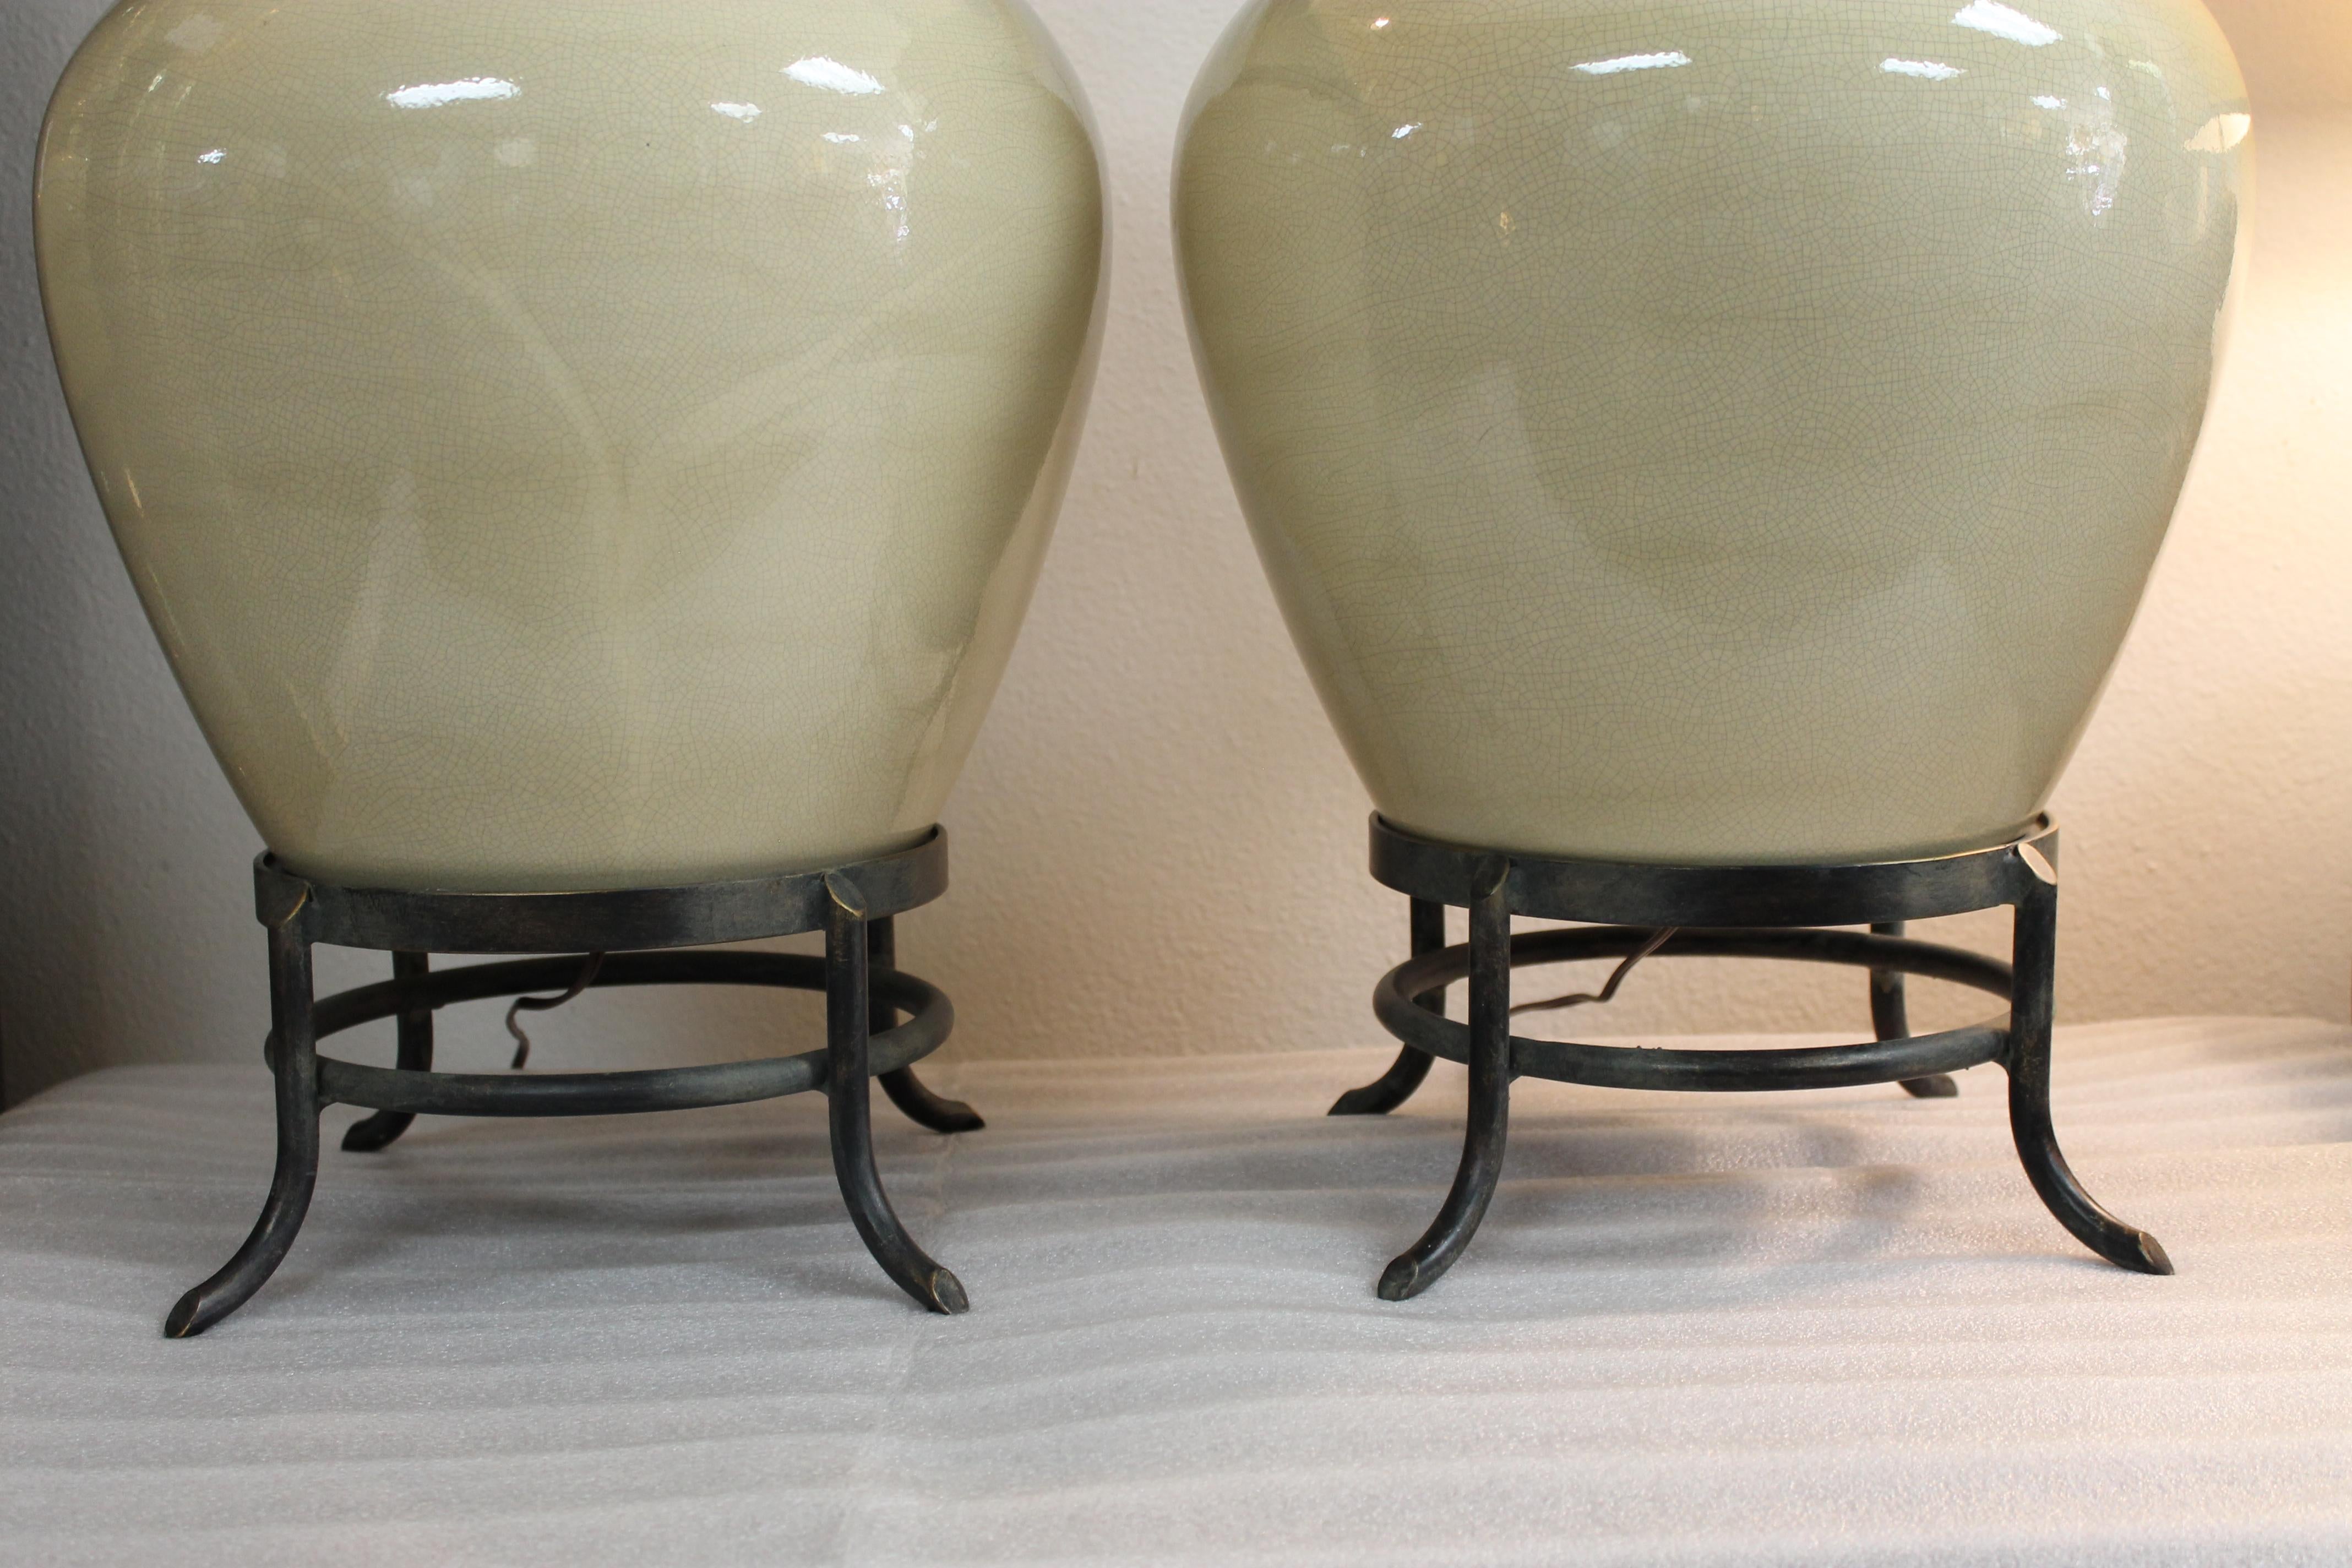 Pair of ivory jar lamps. These lamps have a crackle glaze throughout. Steel base and neck brace. They measure 23.5